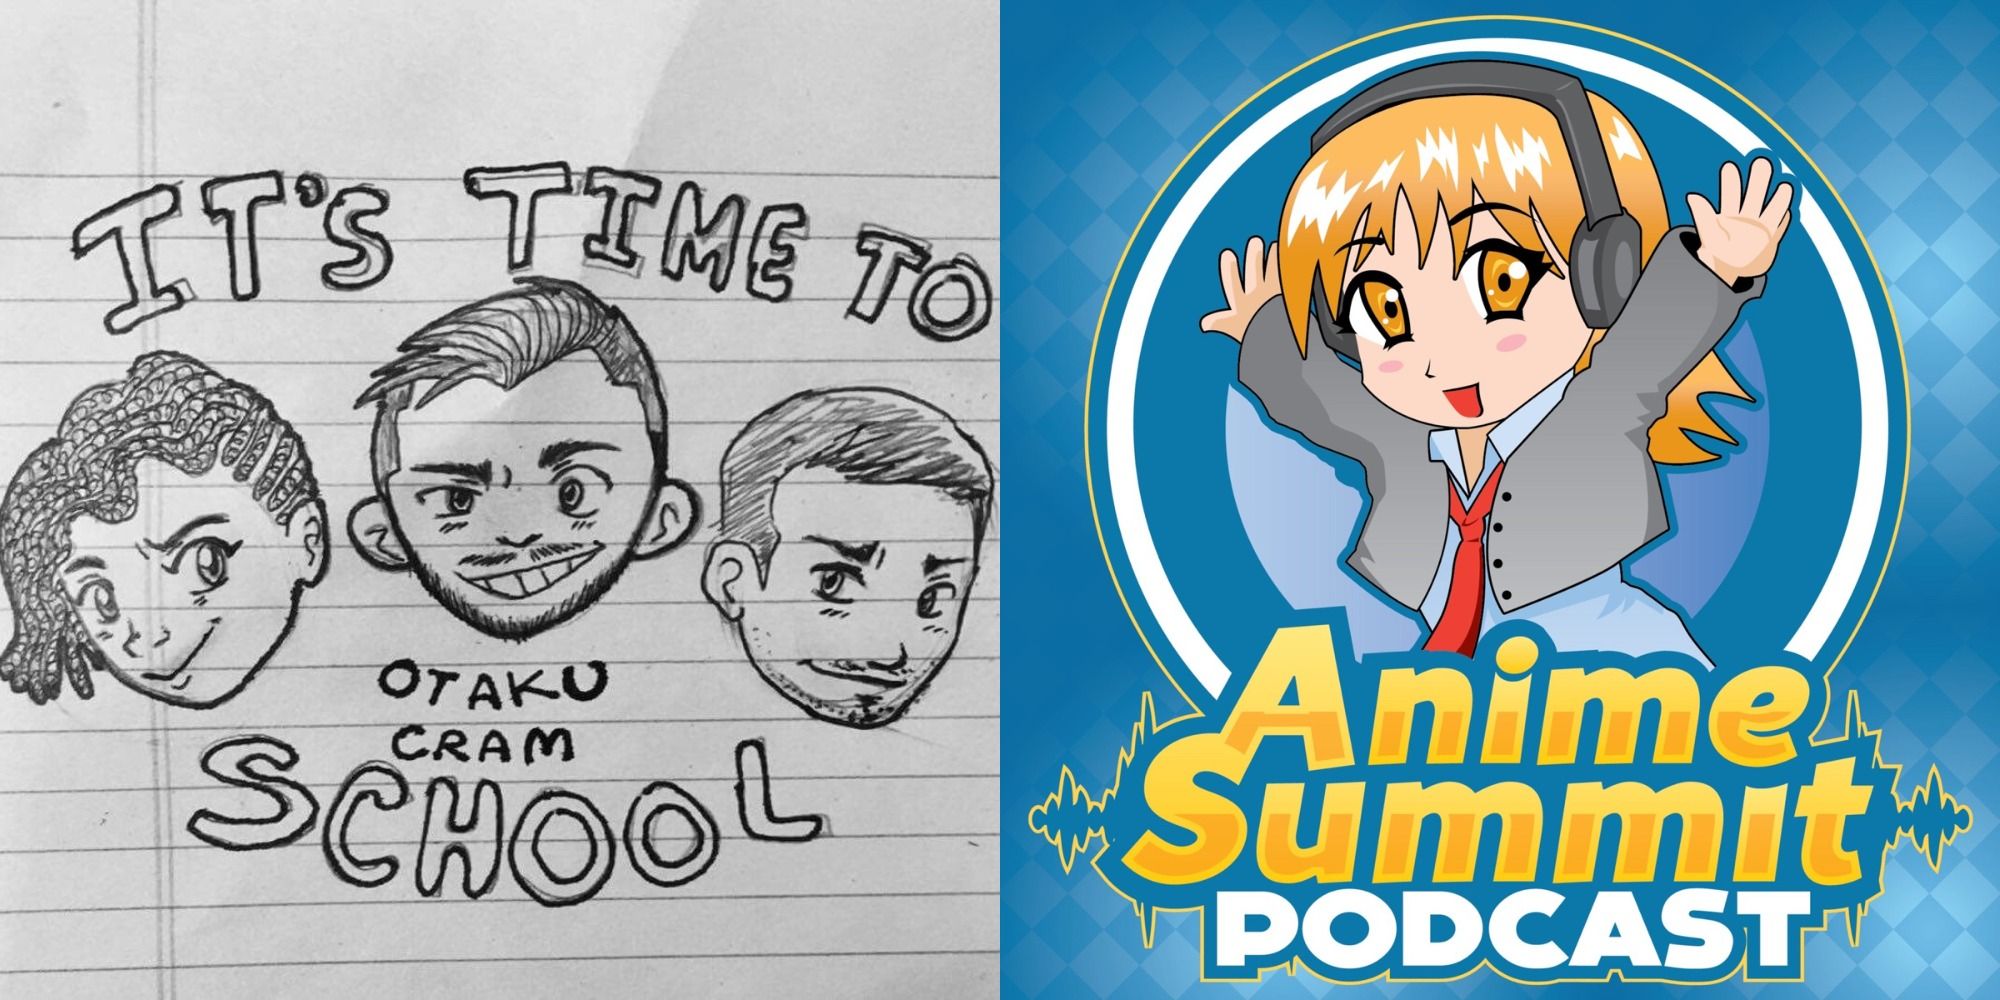 What Is Anime? - WAMC Podcasts